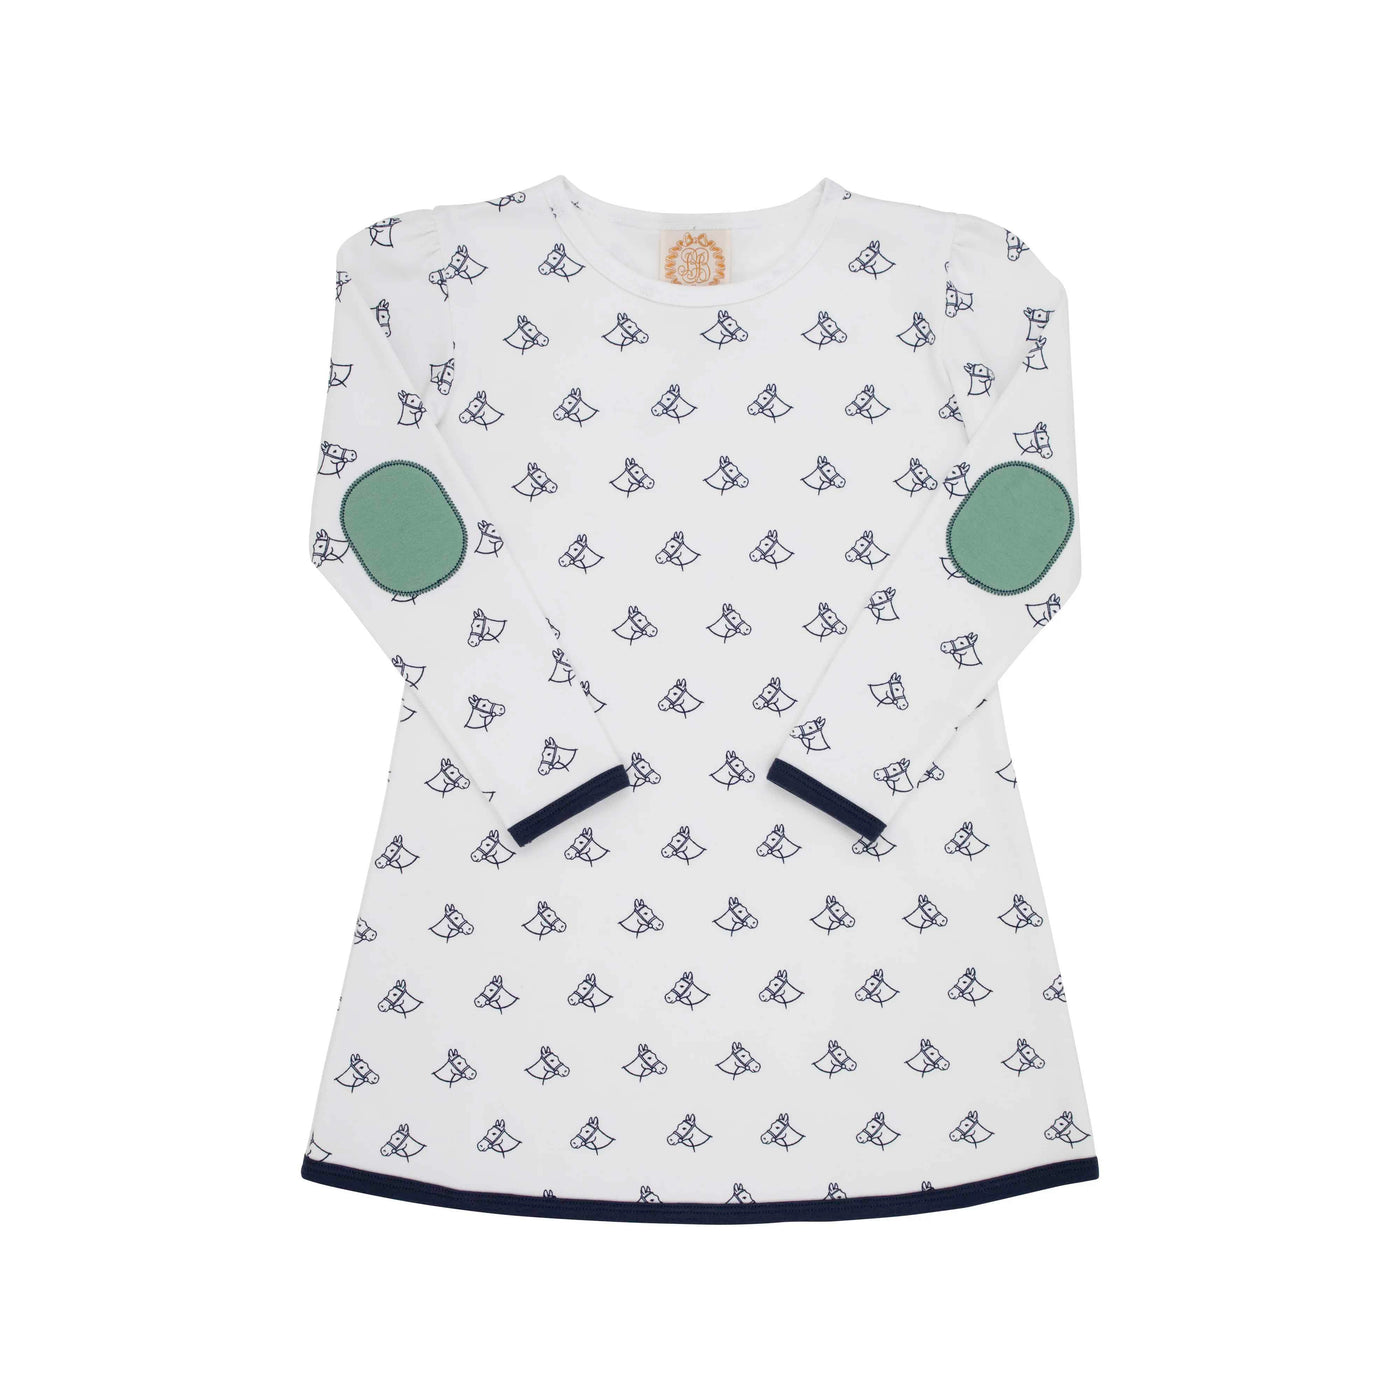 Eleanors Elbow Patch Dress - Pony Portrait With Gallatin Green Elbow Patches & Nantucket Navy Trim